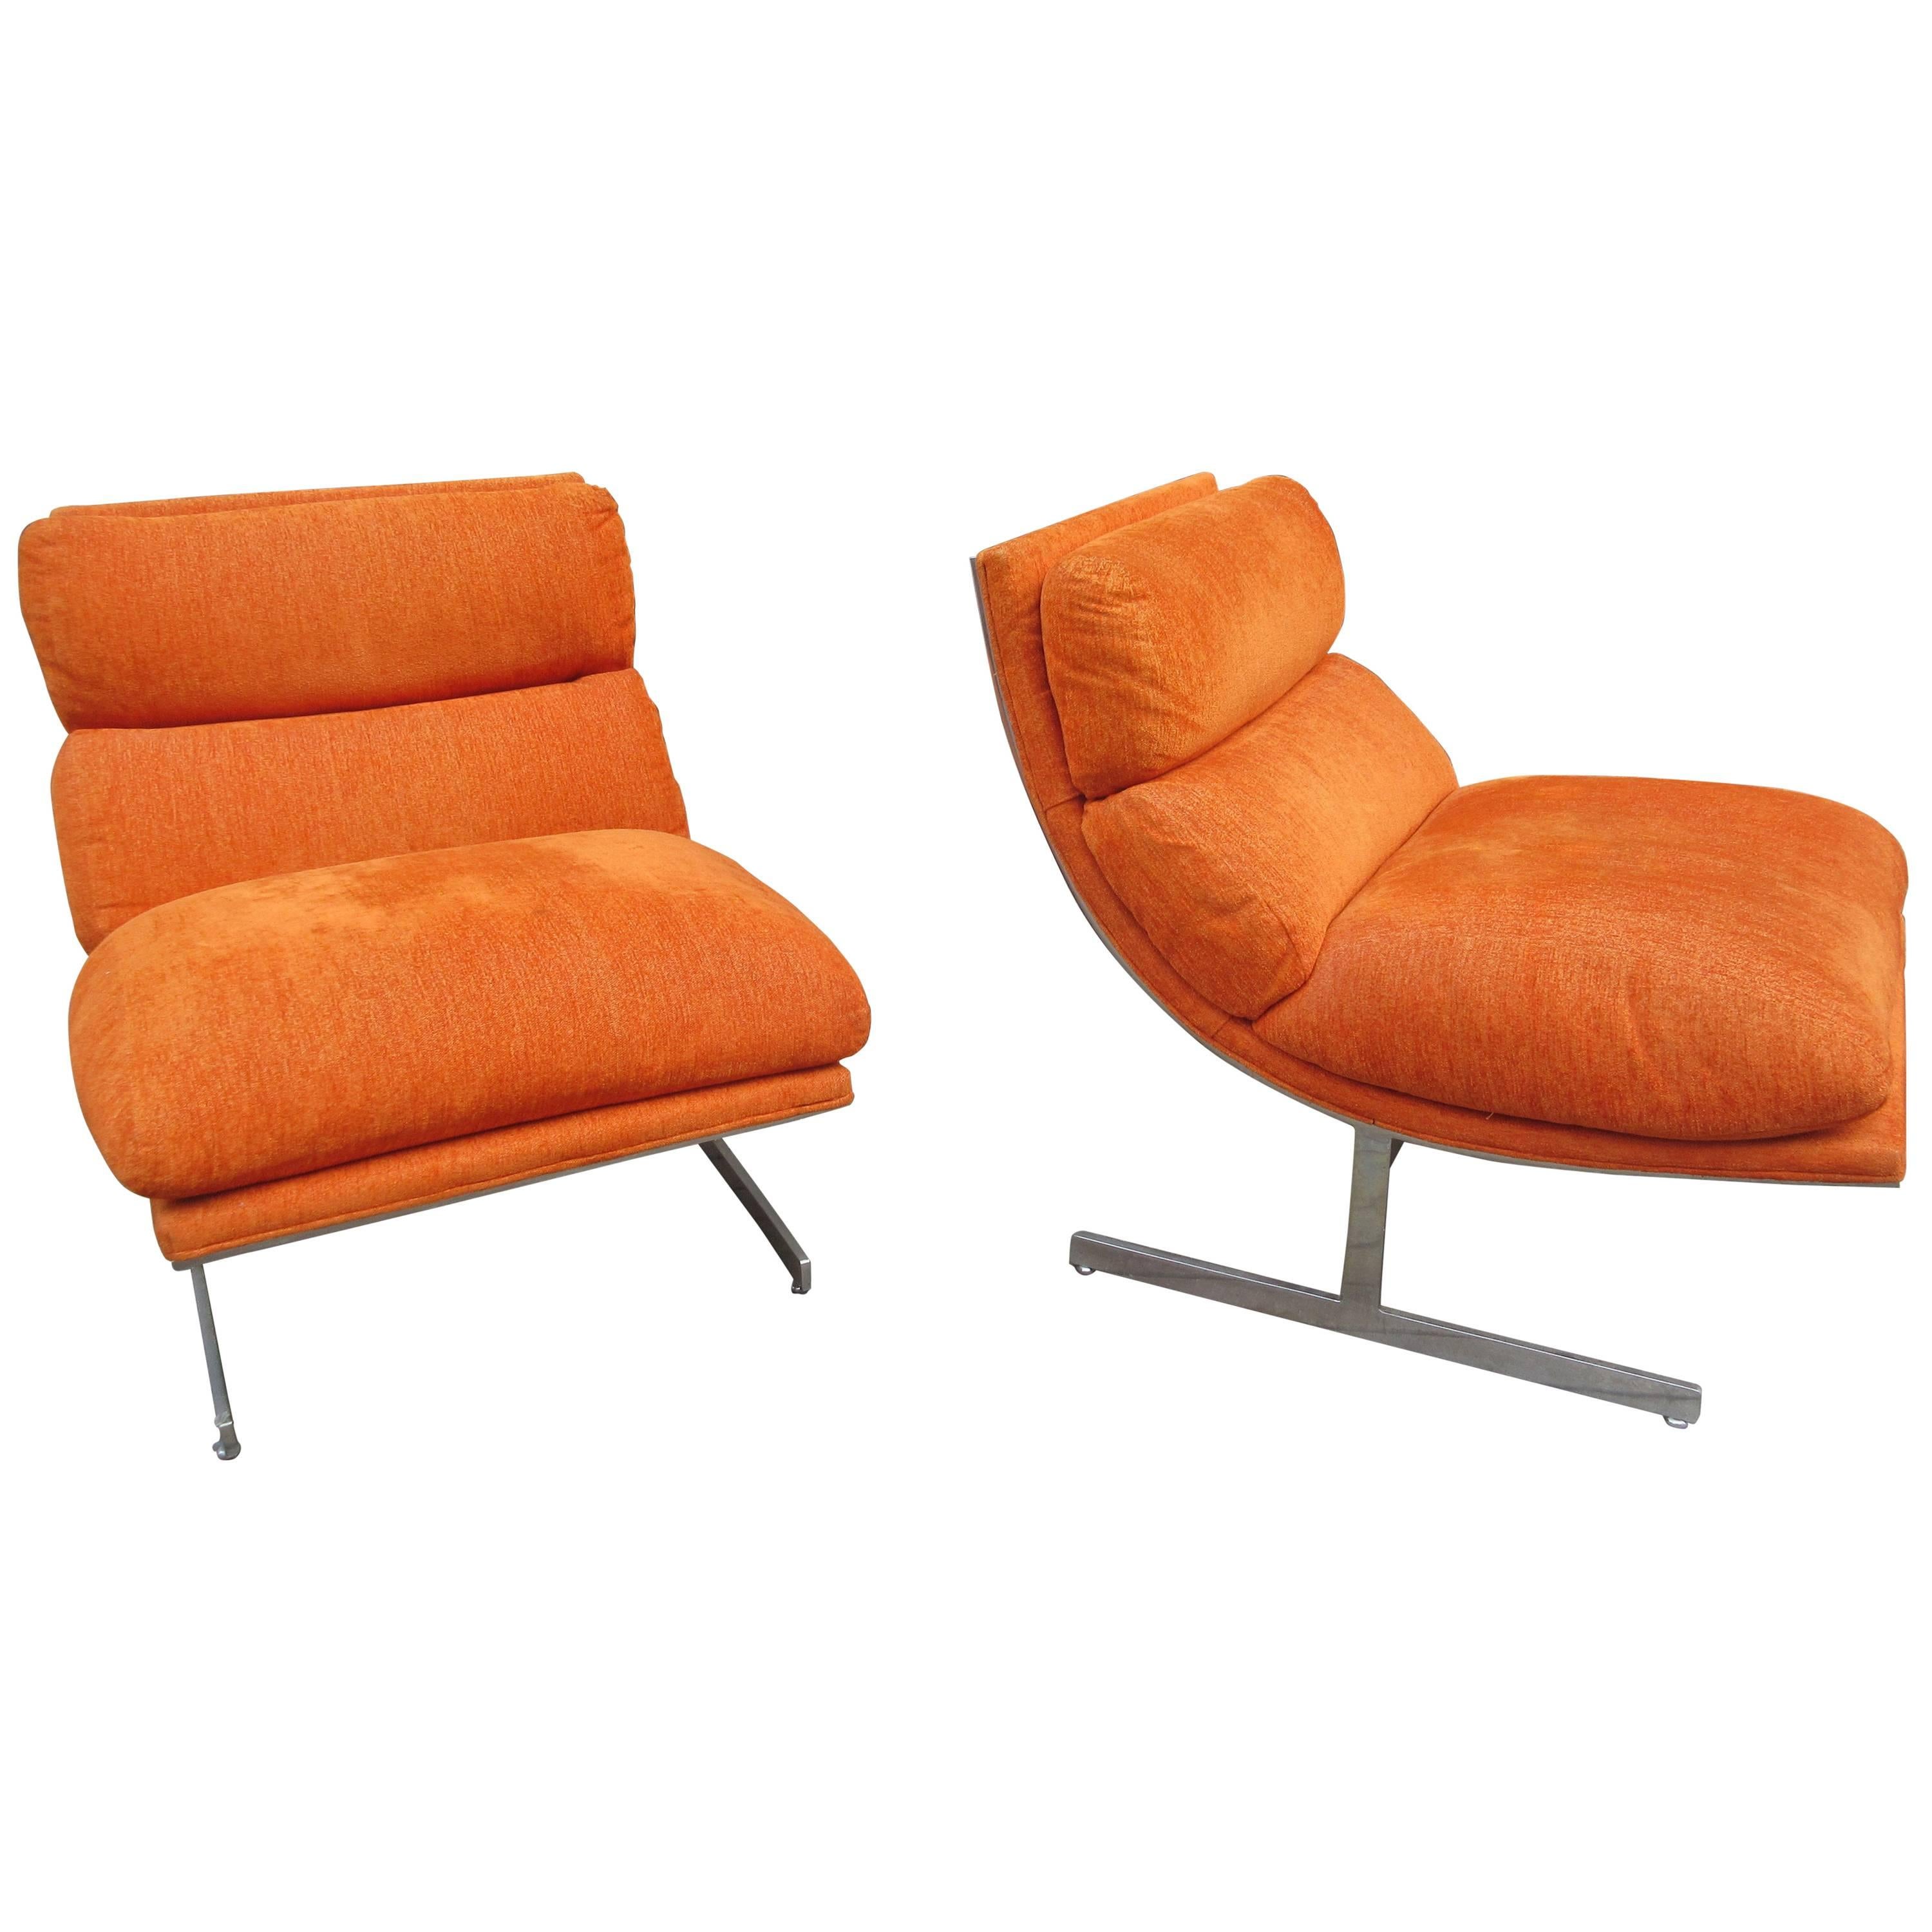 Milo Baughman for Thayer Coggin  pair of Lounge Chairs 